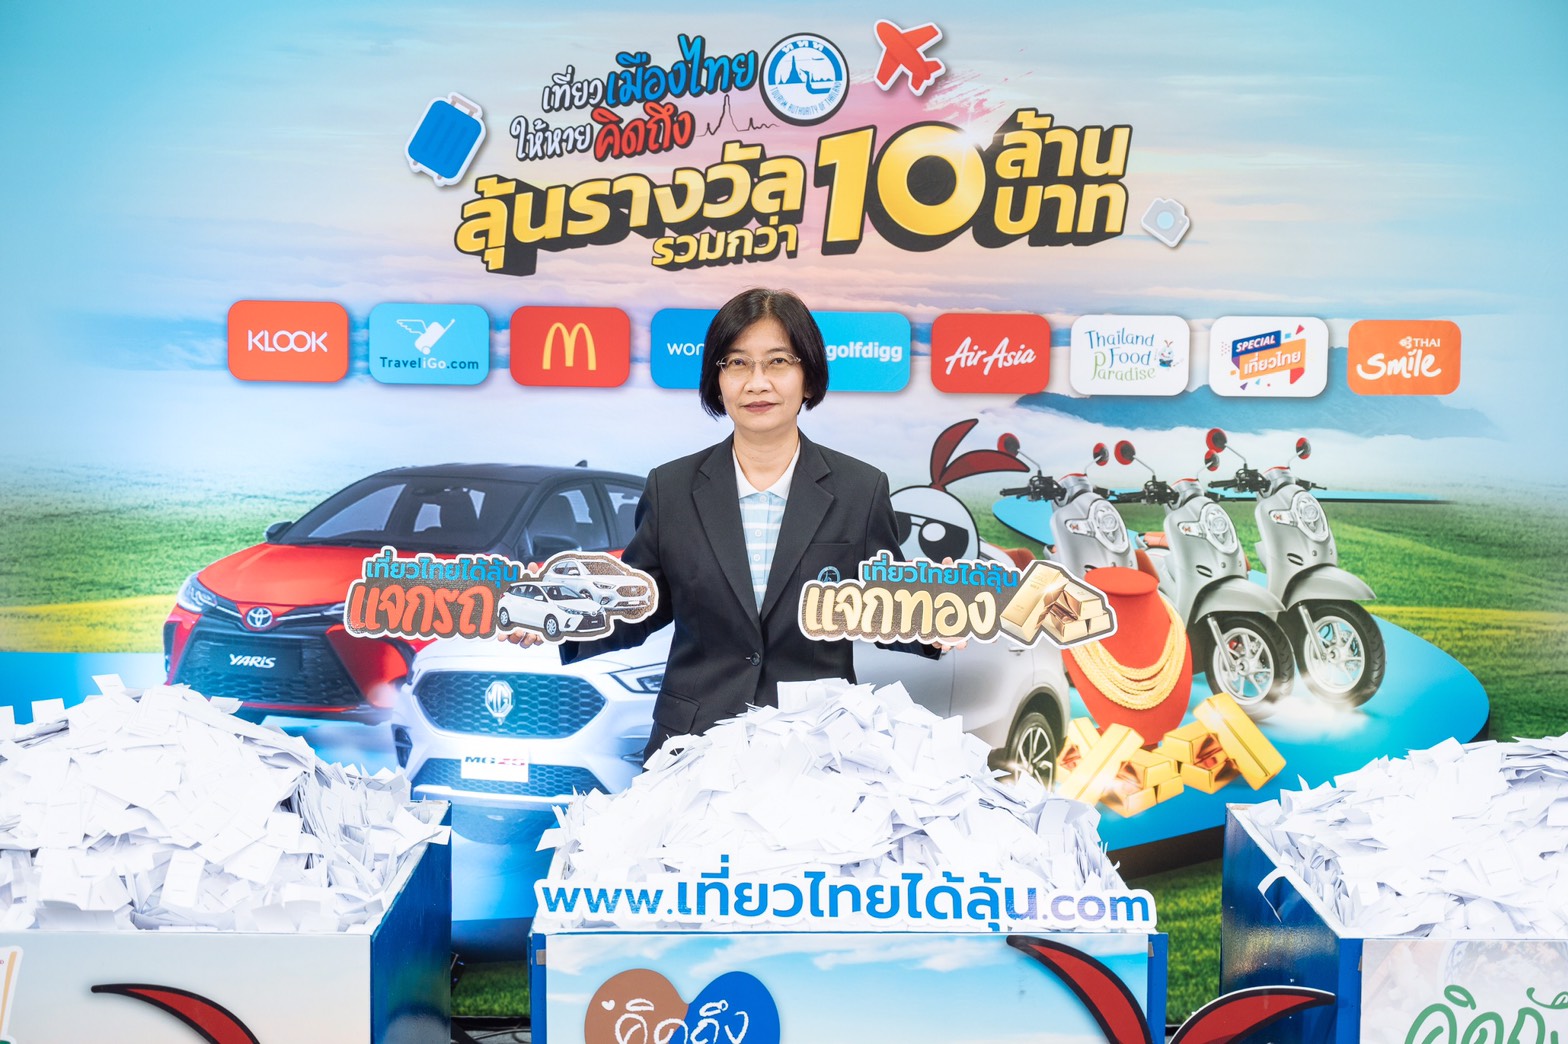 TAT Reveals Second Wave of Lucky Draw Winners for “Visit Thailand, I Miss You” Campaign Prizes Over 10 Million Baht